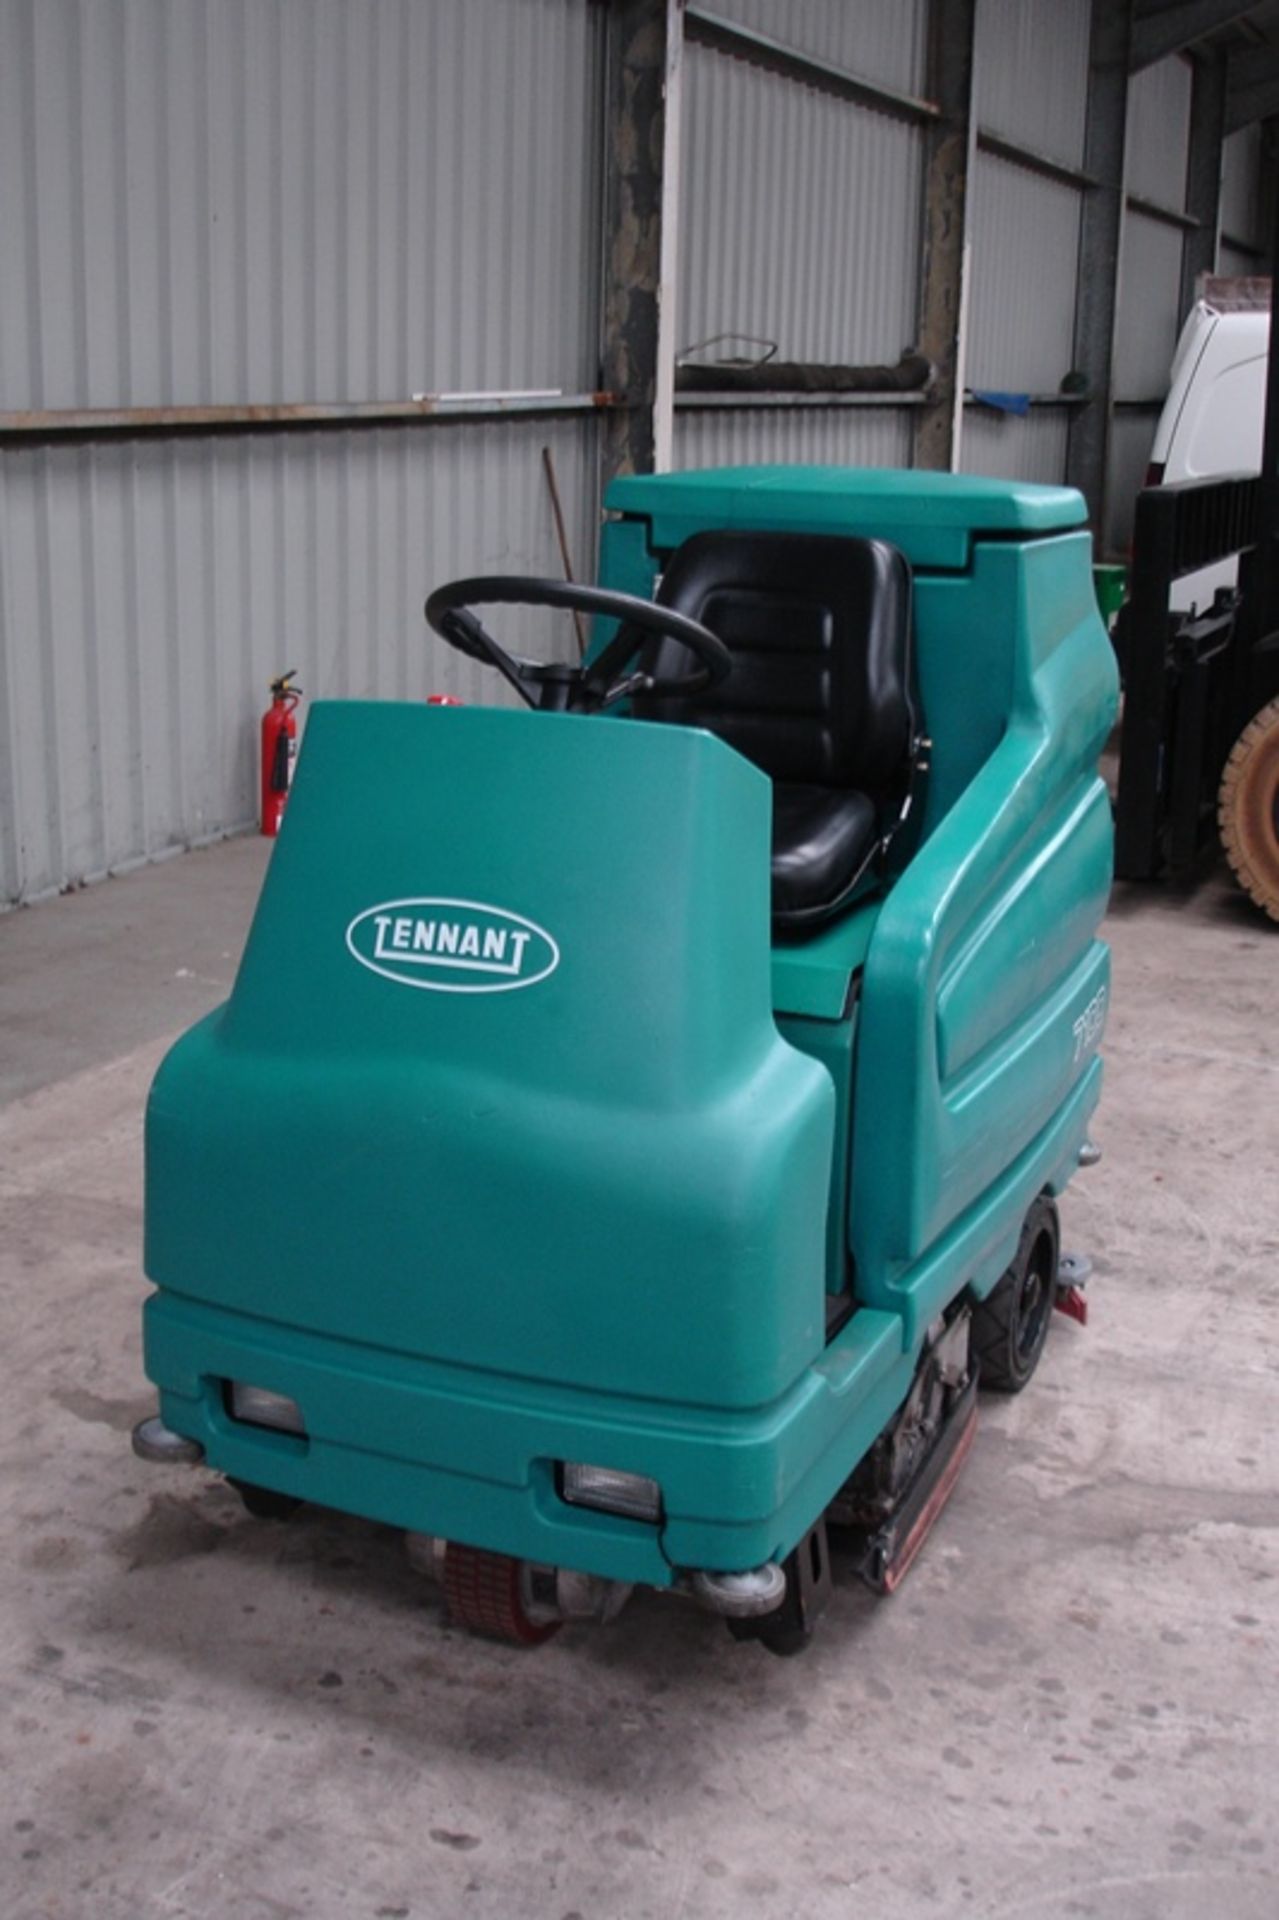 Tennant Electric Ride On Scrubber/Sweeper - Image 2 of 4